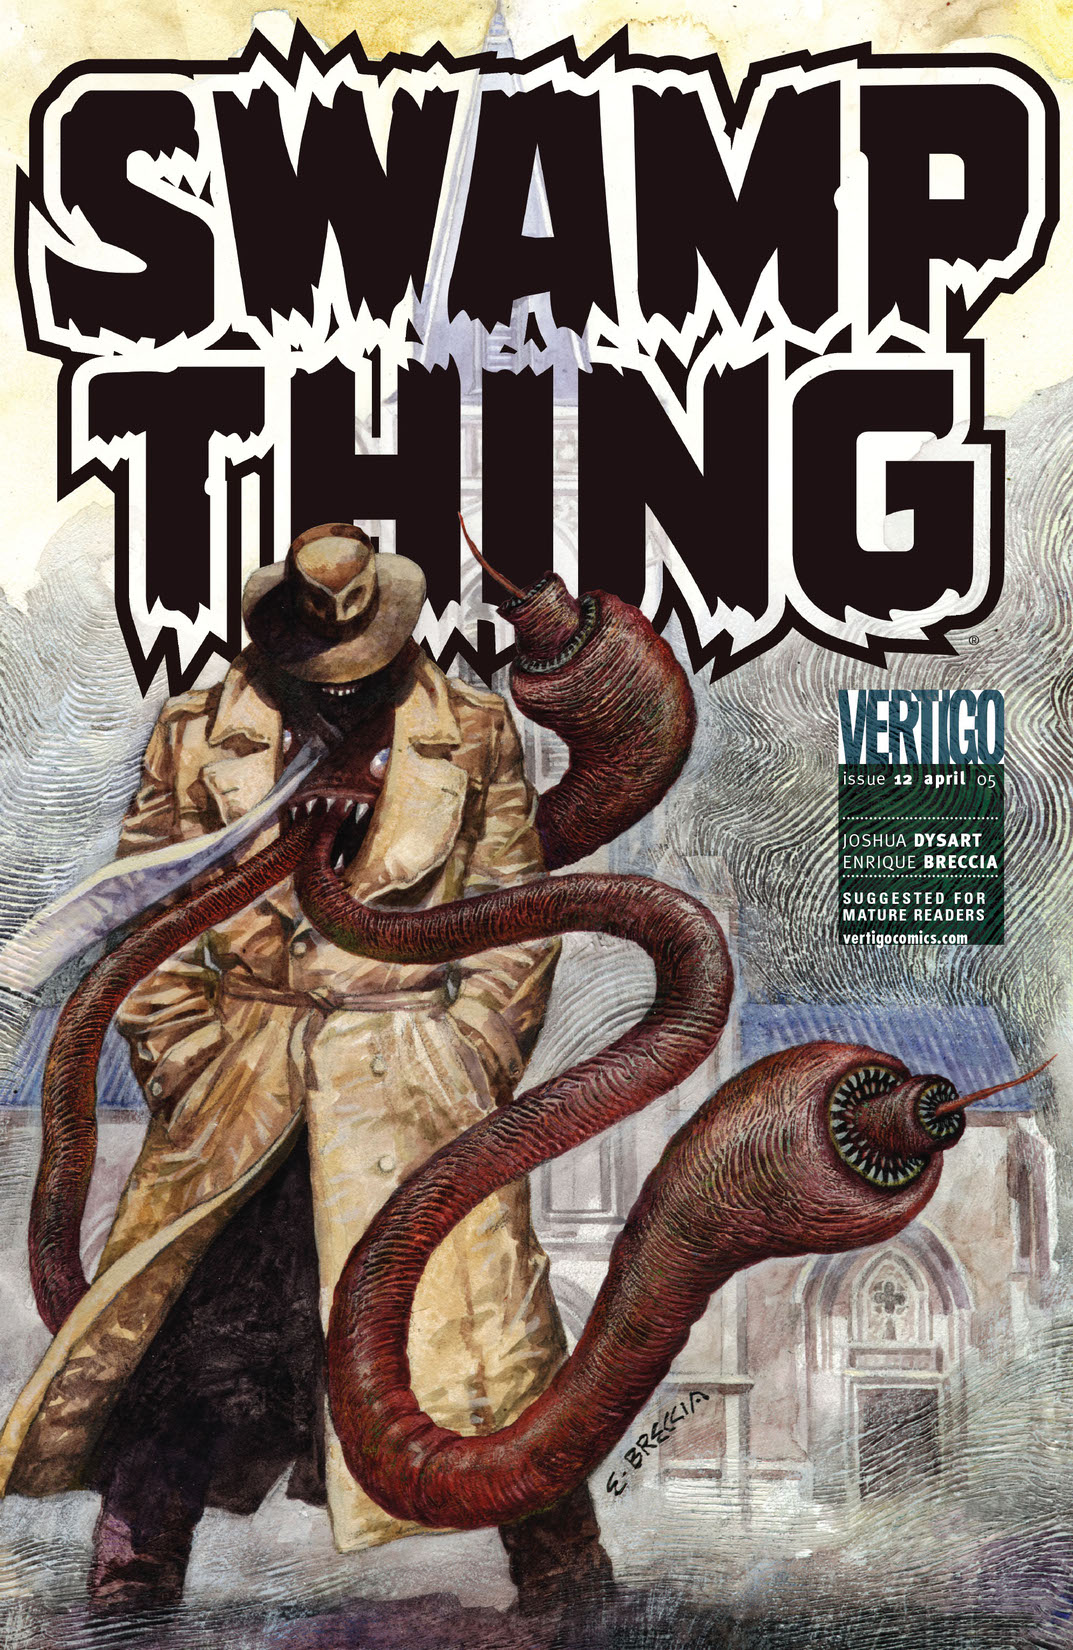 Swamp Thing (2004-) #12 preview images